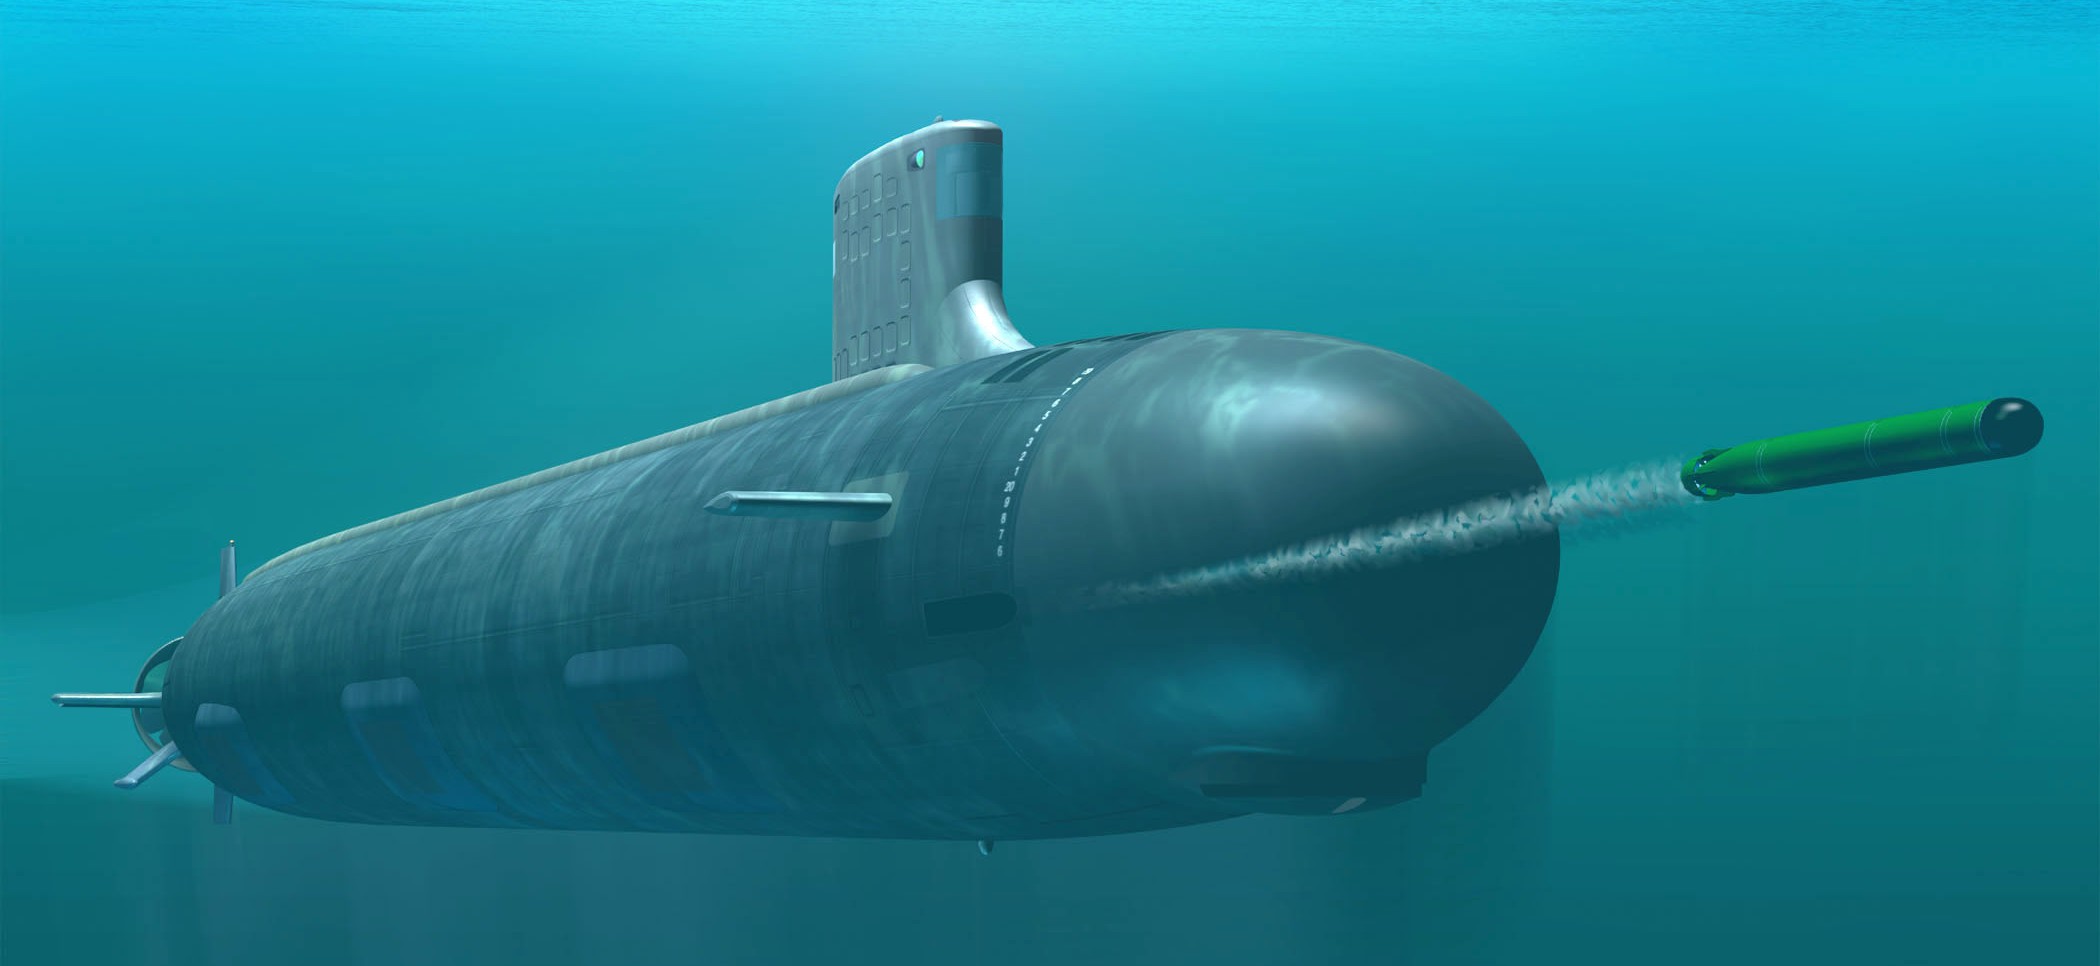 This is what makes the Mark 48 one of the deadliest torpedoes ever built